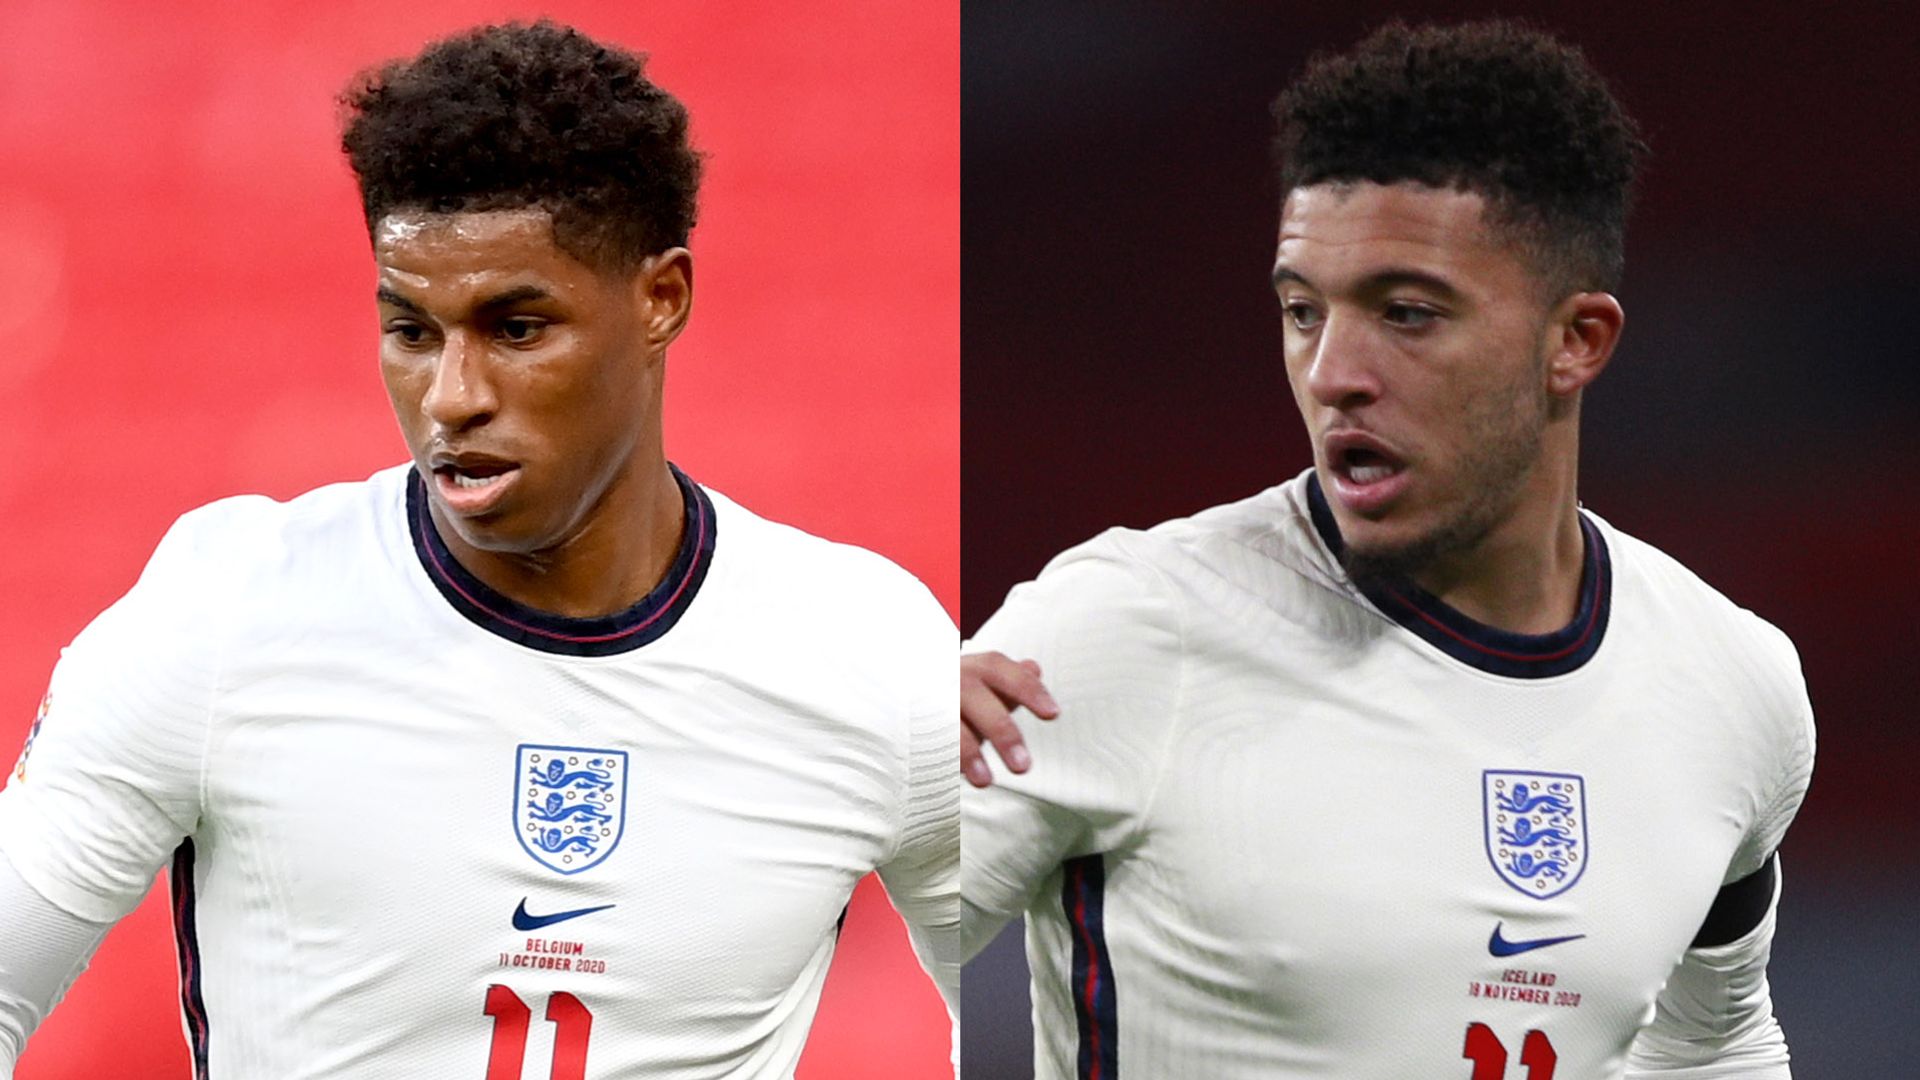 Southgate on Rashford, Sancho: Lots of players with World Cup ambition